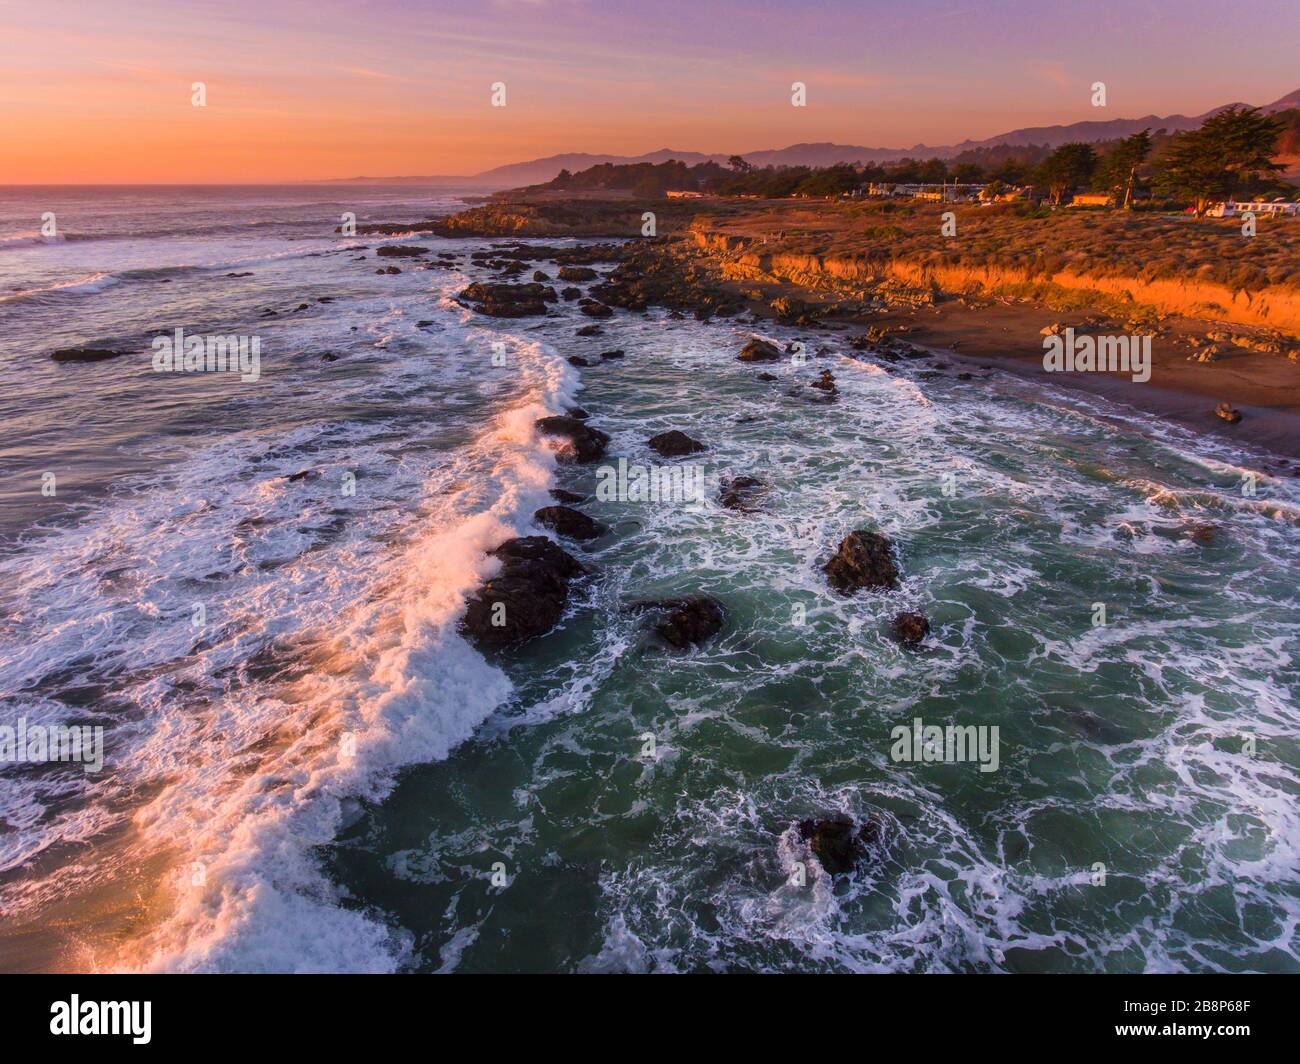 Aerial view of sunset and headlands along California coast. Stock Photo